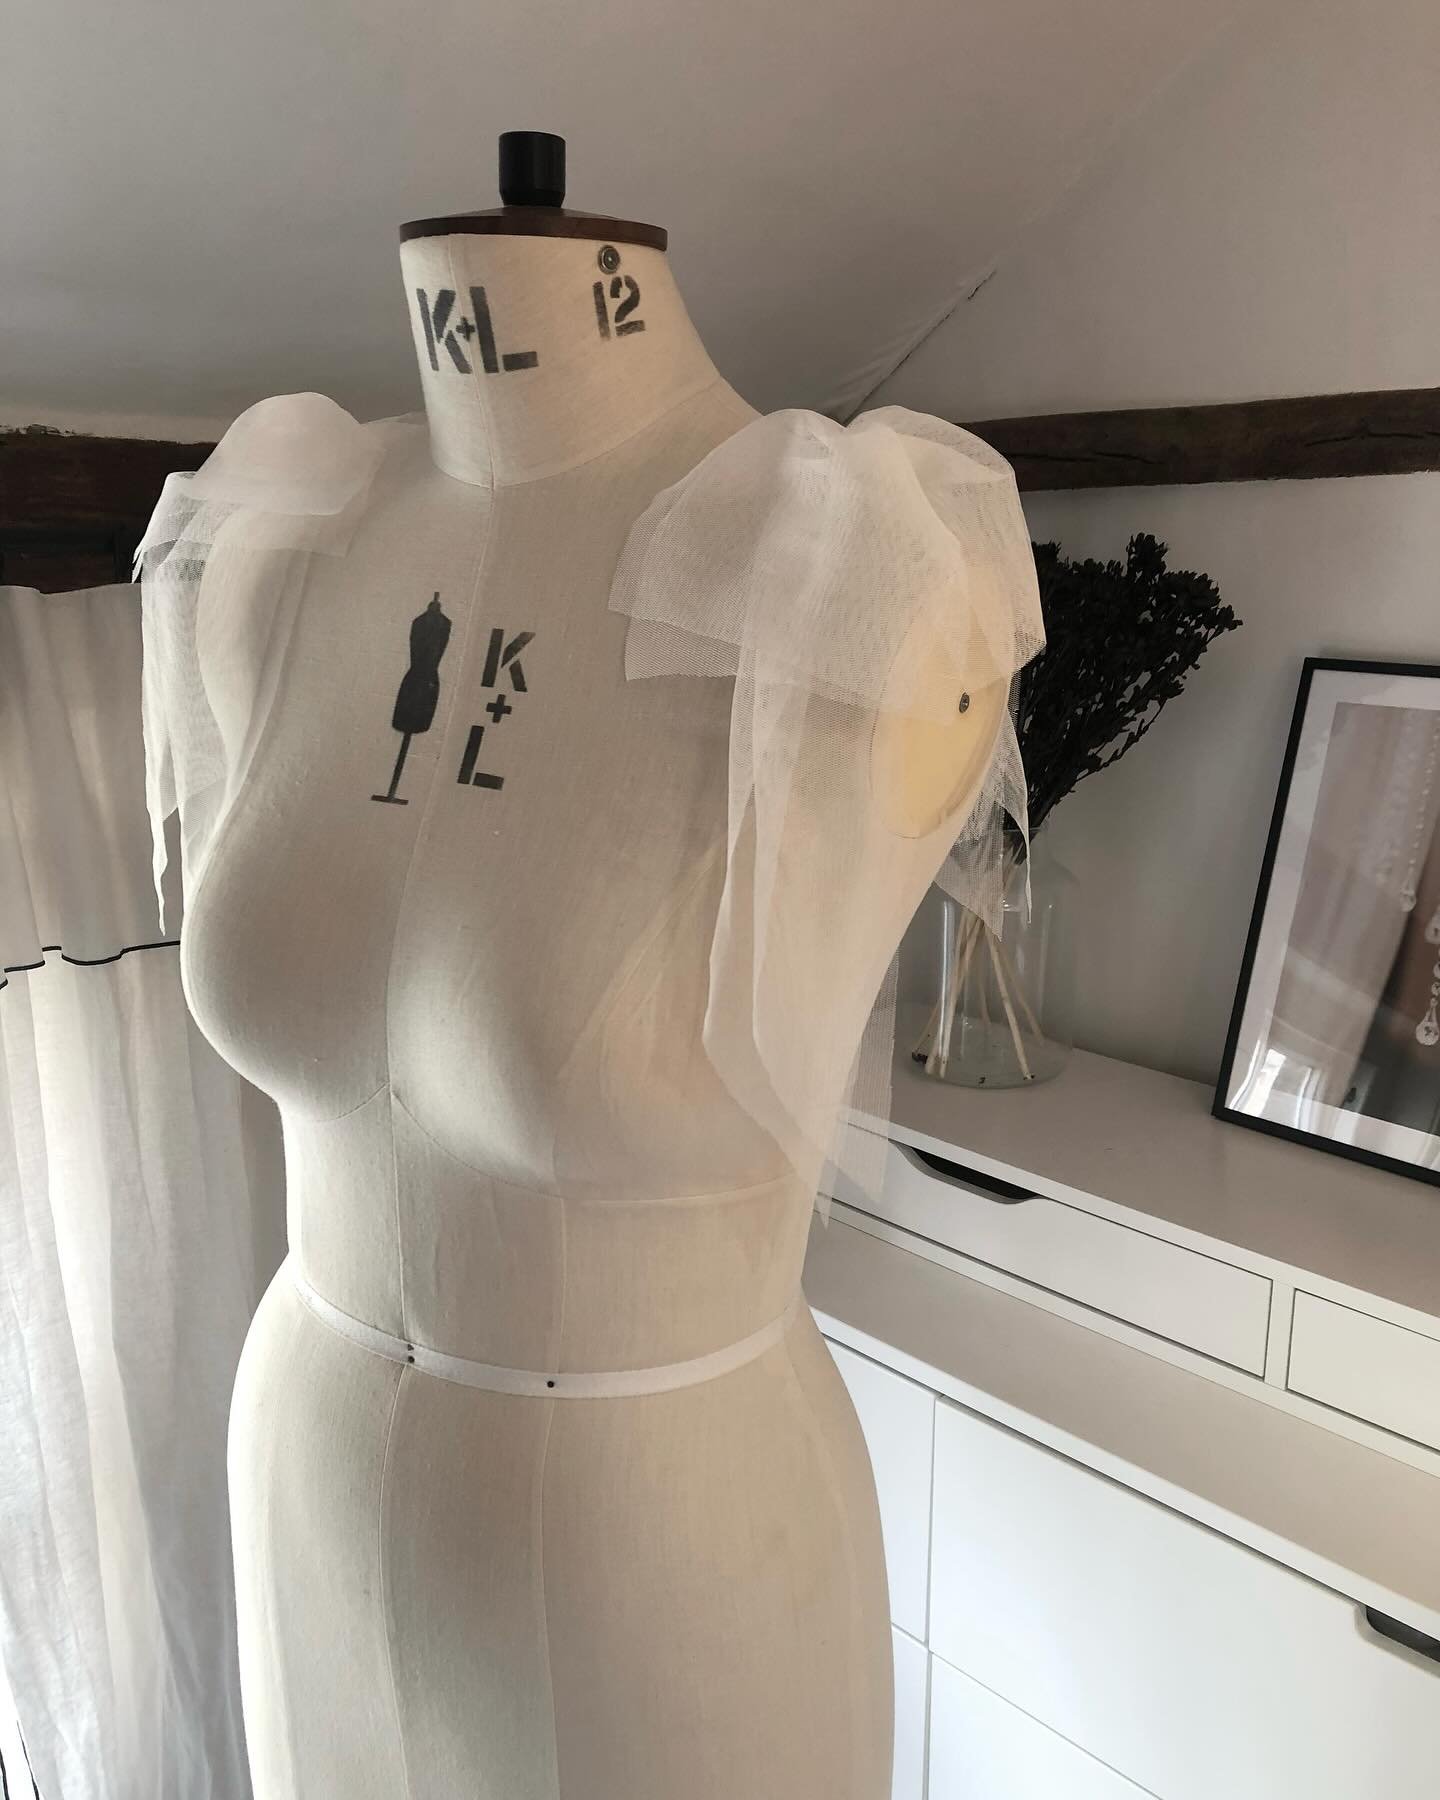 T U L L E  S H O U L D E R  B O W S // 🤍

Customise your bridal look. These ones are the cute shorties but you can have them any length. Why not as long as your train? Or they could be a great alternative to a veil
Swipe to the end to see lovely Ell